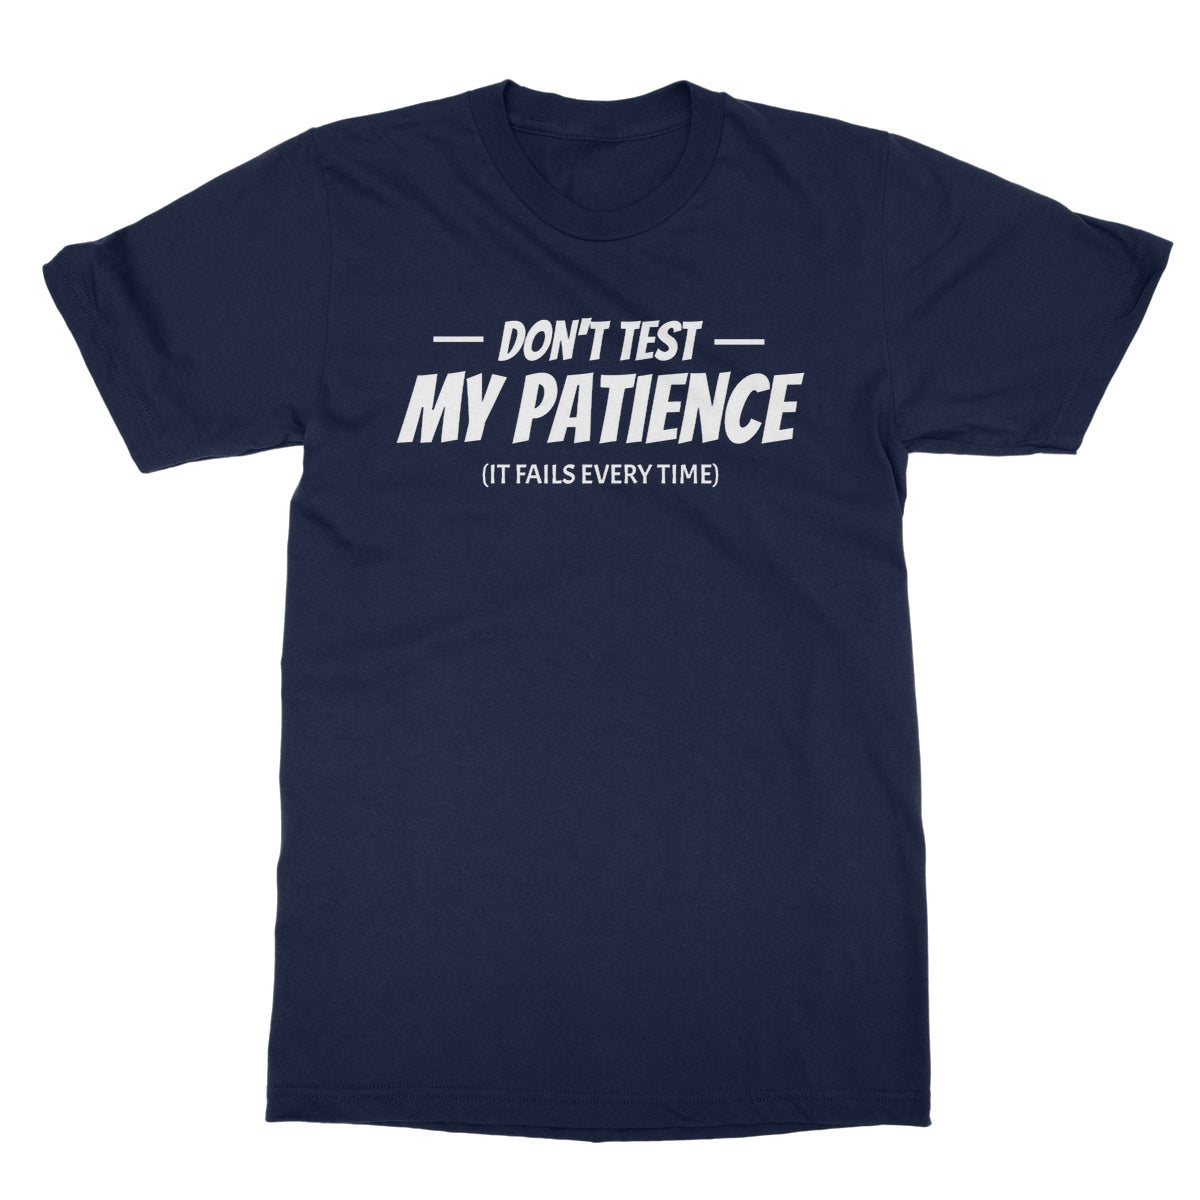 do not test my patience t shirt navy